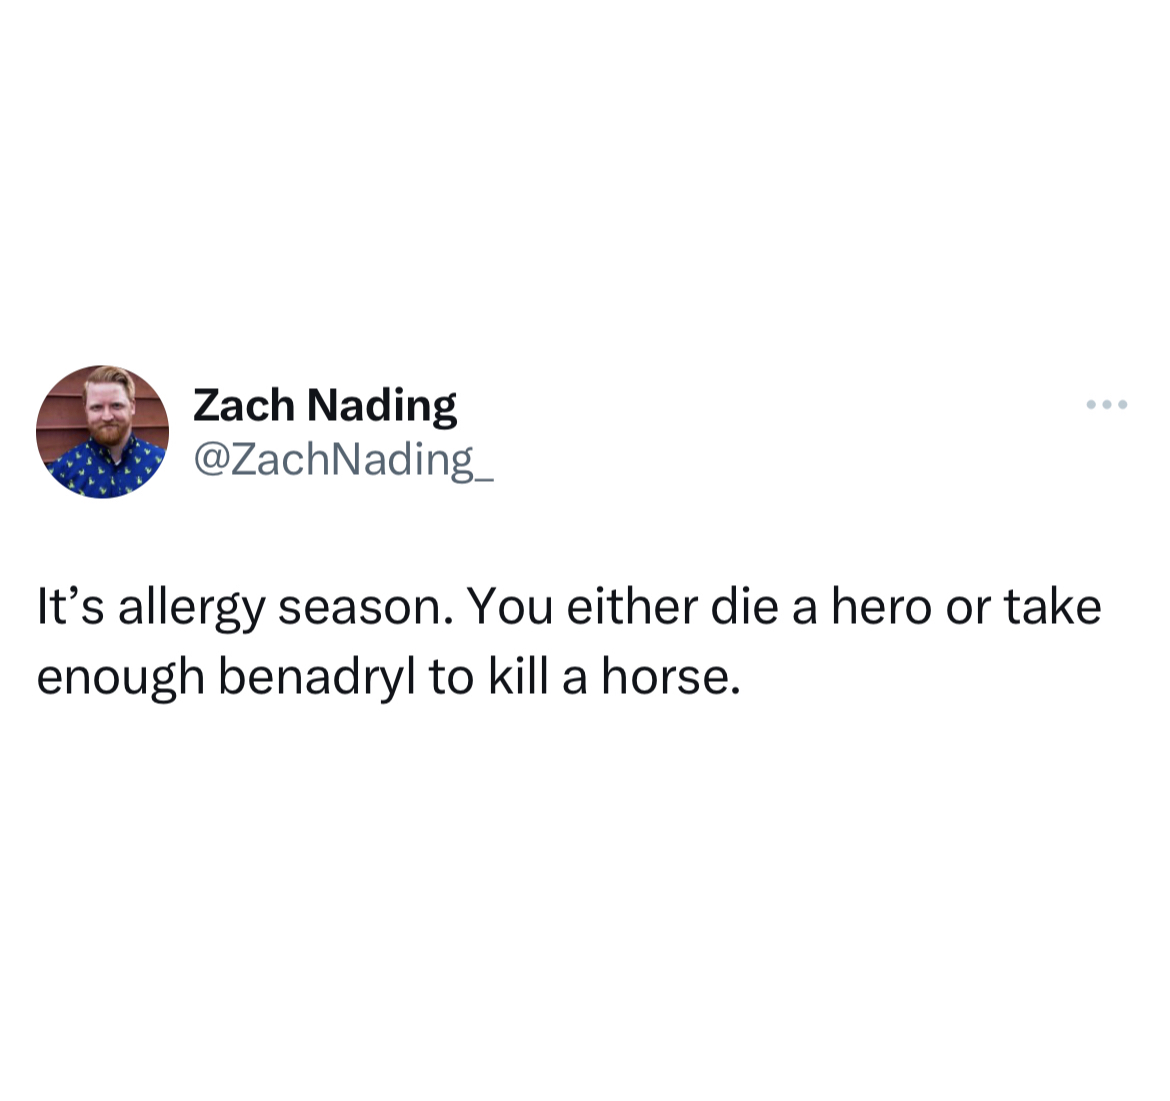 savage tweets - Photograph - Zach Nading It's allergy season. You either die a hero or take enough benadryl to kill a horse.